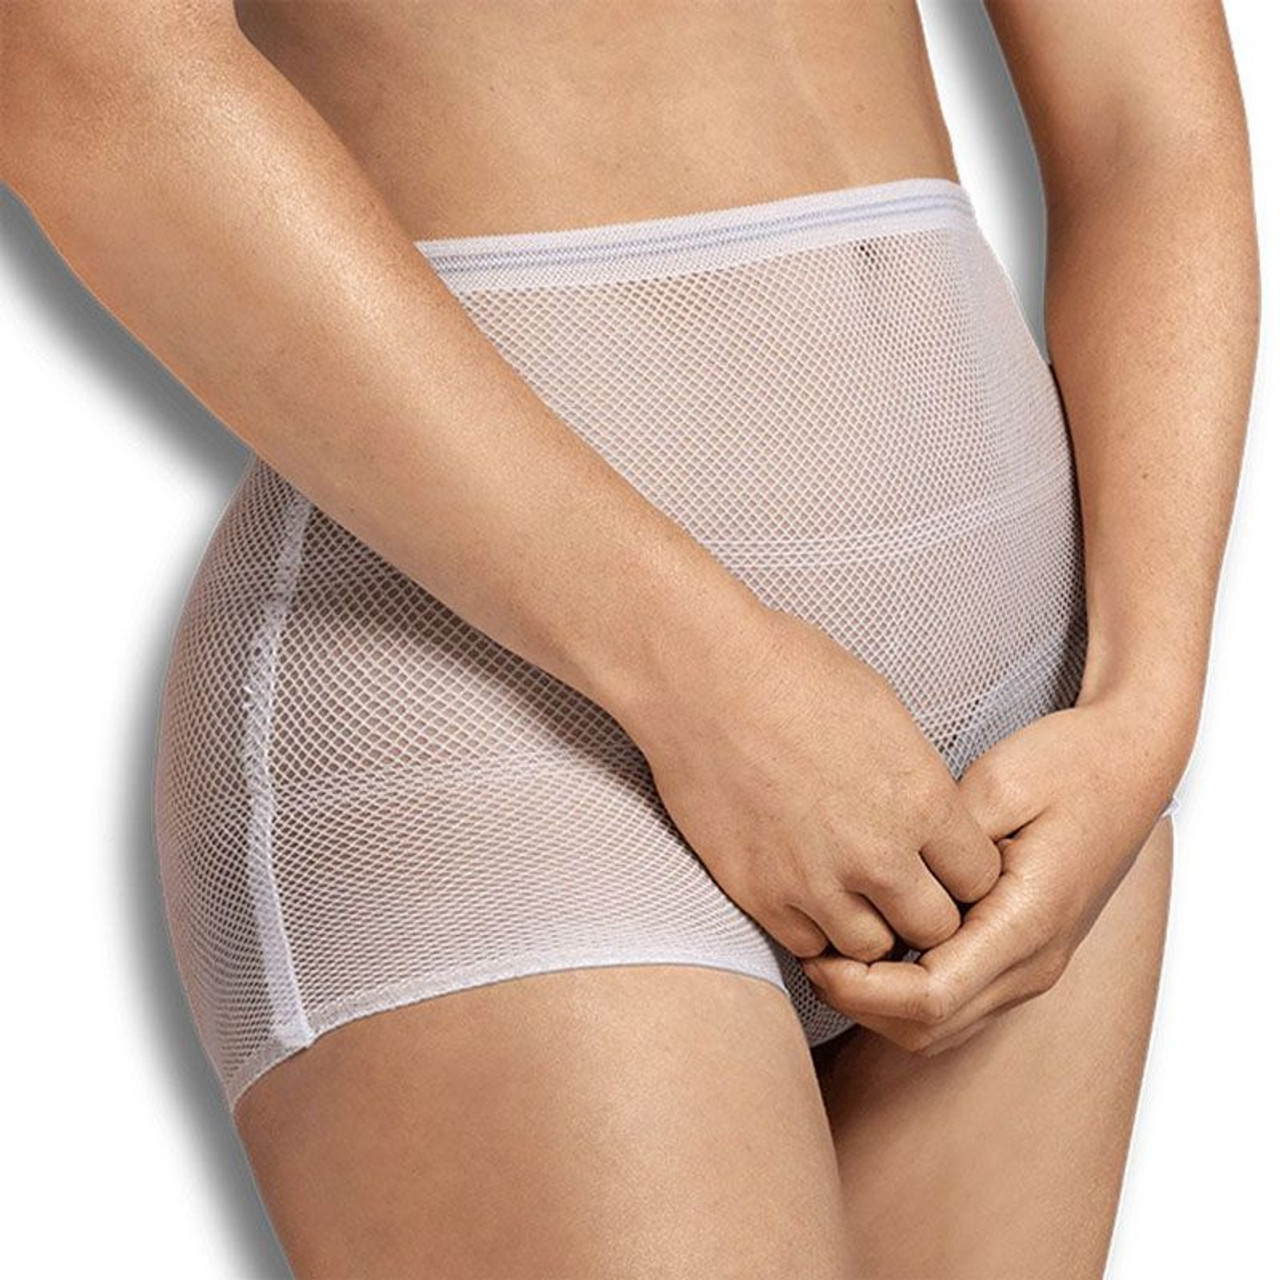 https://cdn11.bigcommerce.com/s-5rdxj17/images/stencil/1280x1280/products/197/2936/Carriwell_Hospital_Panties_-_4_Pack_-_Washable__54314.1587021573.jpg?c=2